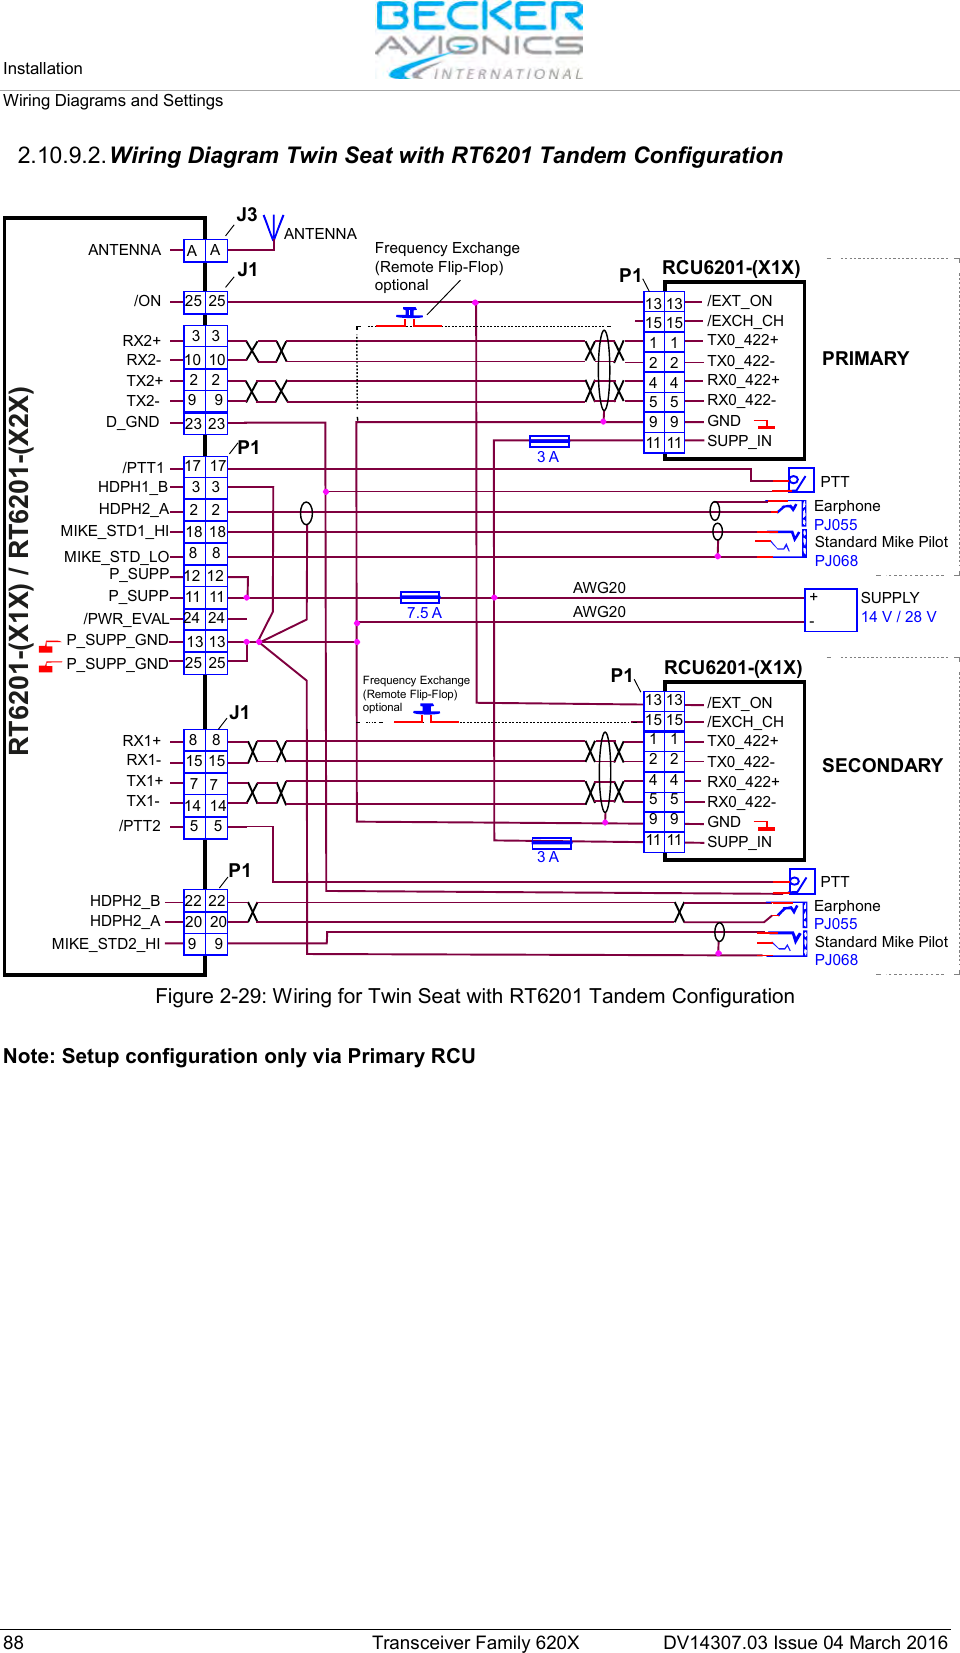 Installation   Wiring Diagrams and Settings  88 Transceiver Family 620X DV14307.03 Issue 04 March 2016 2.10.9.2. Wiring Diagram Twin Seat with RT6201 Tandem Configuration  ANTENNA7.5 A3 A3 A-+AWG20AWG20 SUPPLY14 V / 28 VPTTFrequency Exchange(Remote Flip-Flop)optionalFrequency Exchange(Remote Flip-Flop)optionalEarphonePJ055Standard Mike PilotPJ068PTTEarphonePJ055Standard Mike PilotPJ068J3J1J1P1P1P1ANTENNA/ONRX2+RX2-TX2+TX2-RX1+RX1-TX1+TX1-D_GND/EXT_ON/EXCH_CHTX0_422+TX0_422-RX0_422+RX0_422-GNDSUPP_IN/EXT_ON/EXCH_CHTX0_422+TX0_422-RX0_422+RX0_422-GNDSUPP_IN/PTT1HDPH1_BHDPH2_A/PTT2HDPH2_BHDPH2_AMIKE_STD1_HIMIKE_STD2_HIMIKE_STD_LOP_SUPPP_SUPP_GNDP_SUPP_GNDP_SUPP/PWR_EVALAA24 2412 1211 1113 1325 2525 2523 2310 1014 147717 173 33 32 22 25 518 1888889 99 920 2015 1522 22RT6201-(X1X) / RT6201-(X2X)13 1315 151 12 24 45 59 911 11RCU6201-(X1X)13 1315 151 12 24 45 59 911 11RCU6201-(X1X)P1PRIMARYSECONDARY Figure 2-29: Wiring for Twin Seat with RT6201 Tandem Configuration  Note: Setup configuration only via Primary RCU   